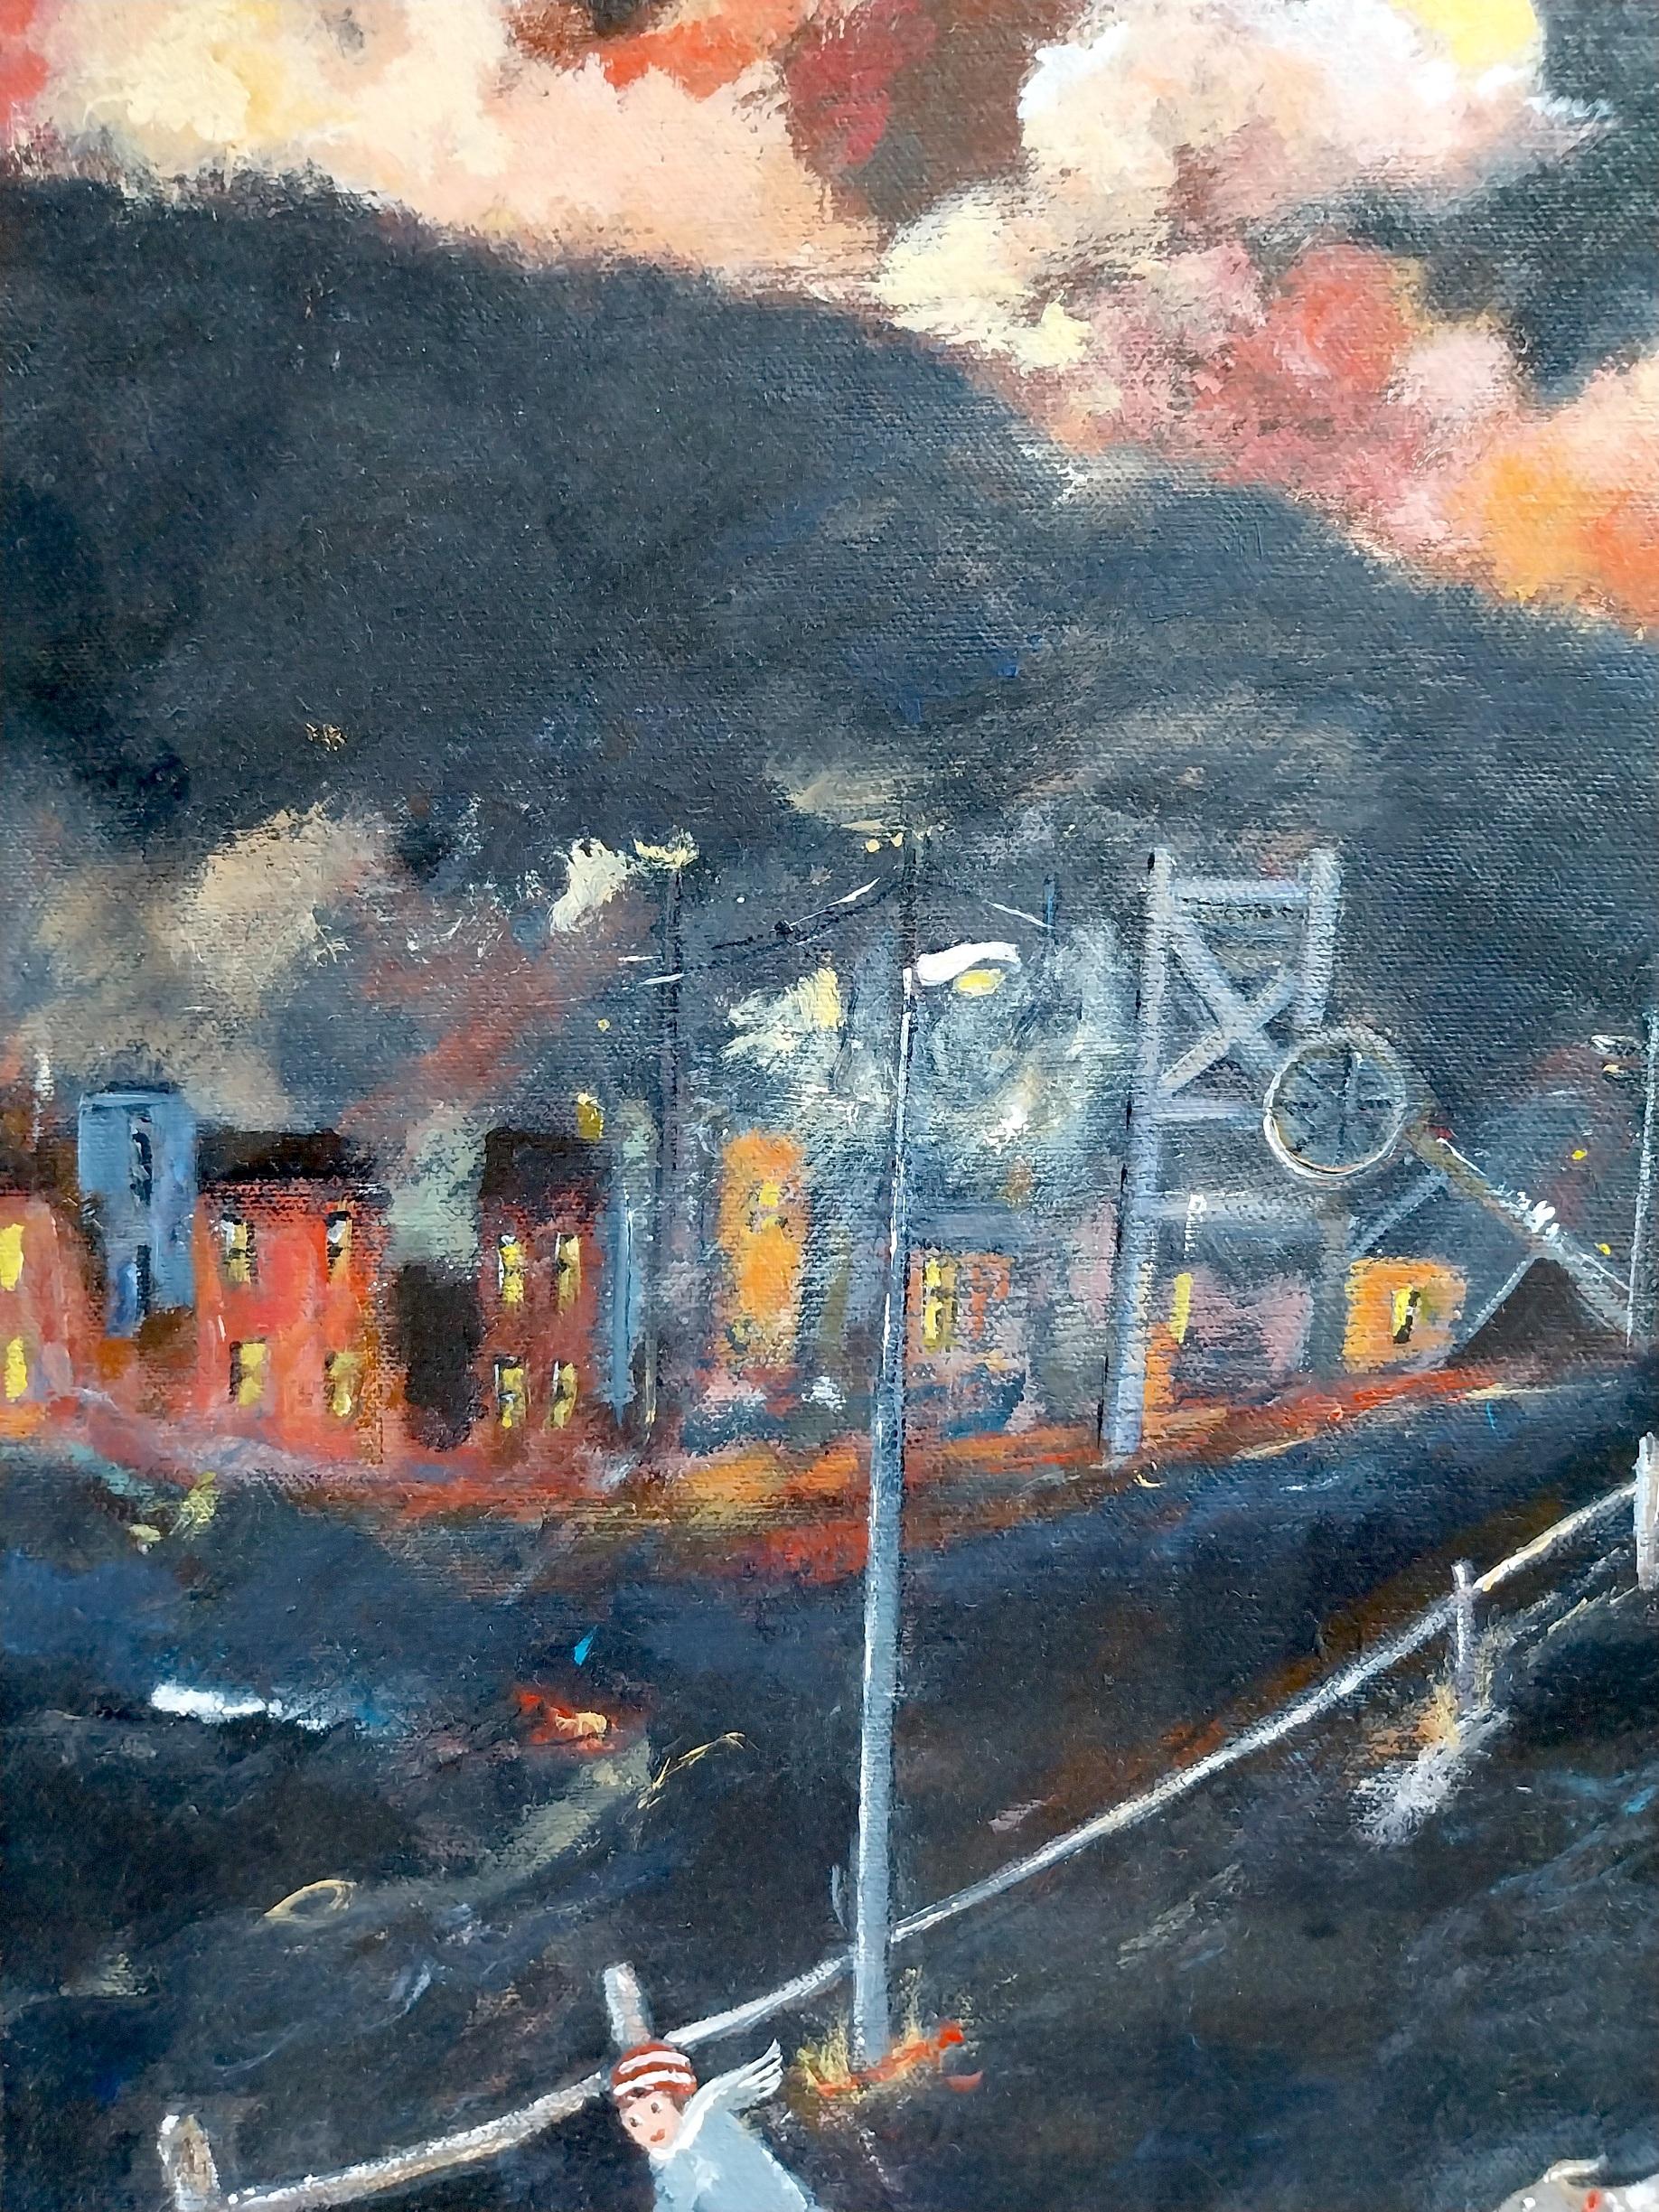 From an exhibition created by the artist to celebrate the UK Miners strike from the 1980's
These hard times for whole communities in the Welsh Valleys created a sense of togetherness..

Acrylic on canvas